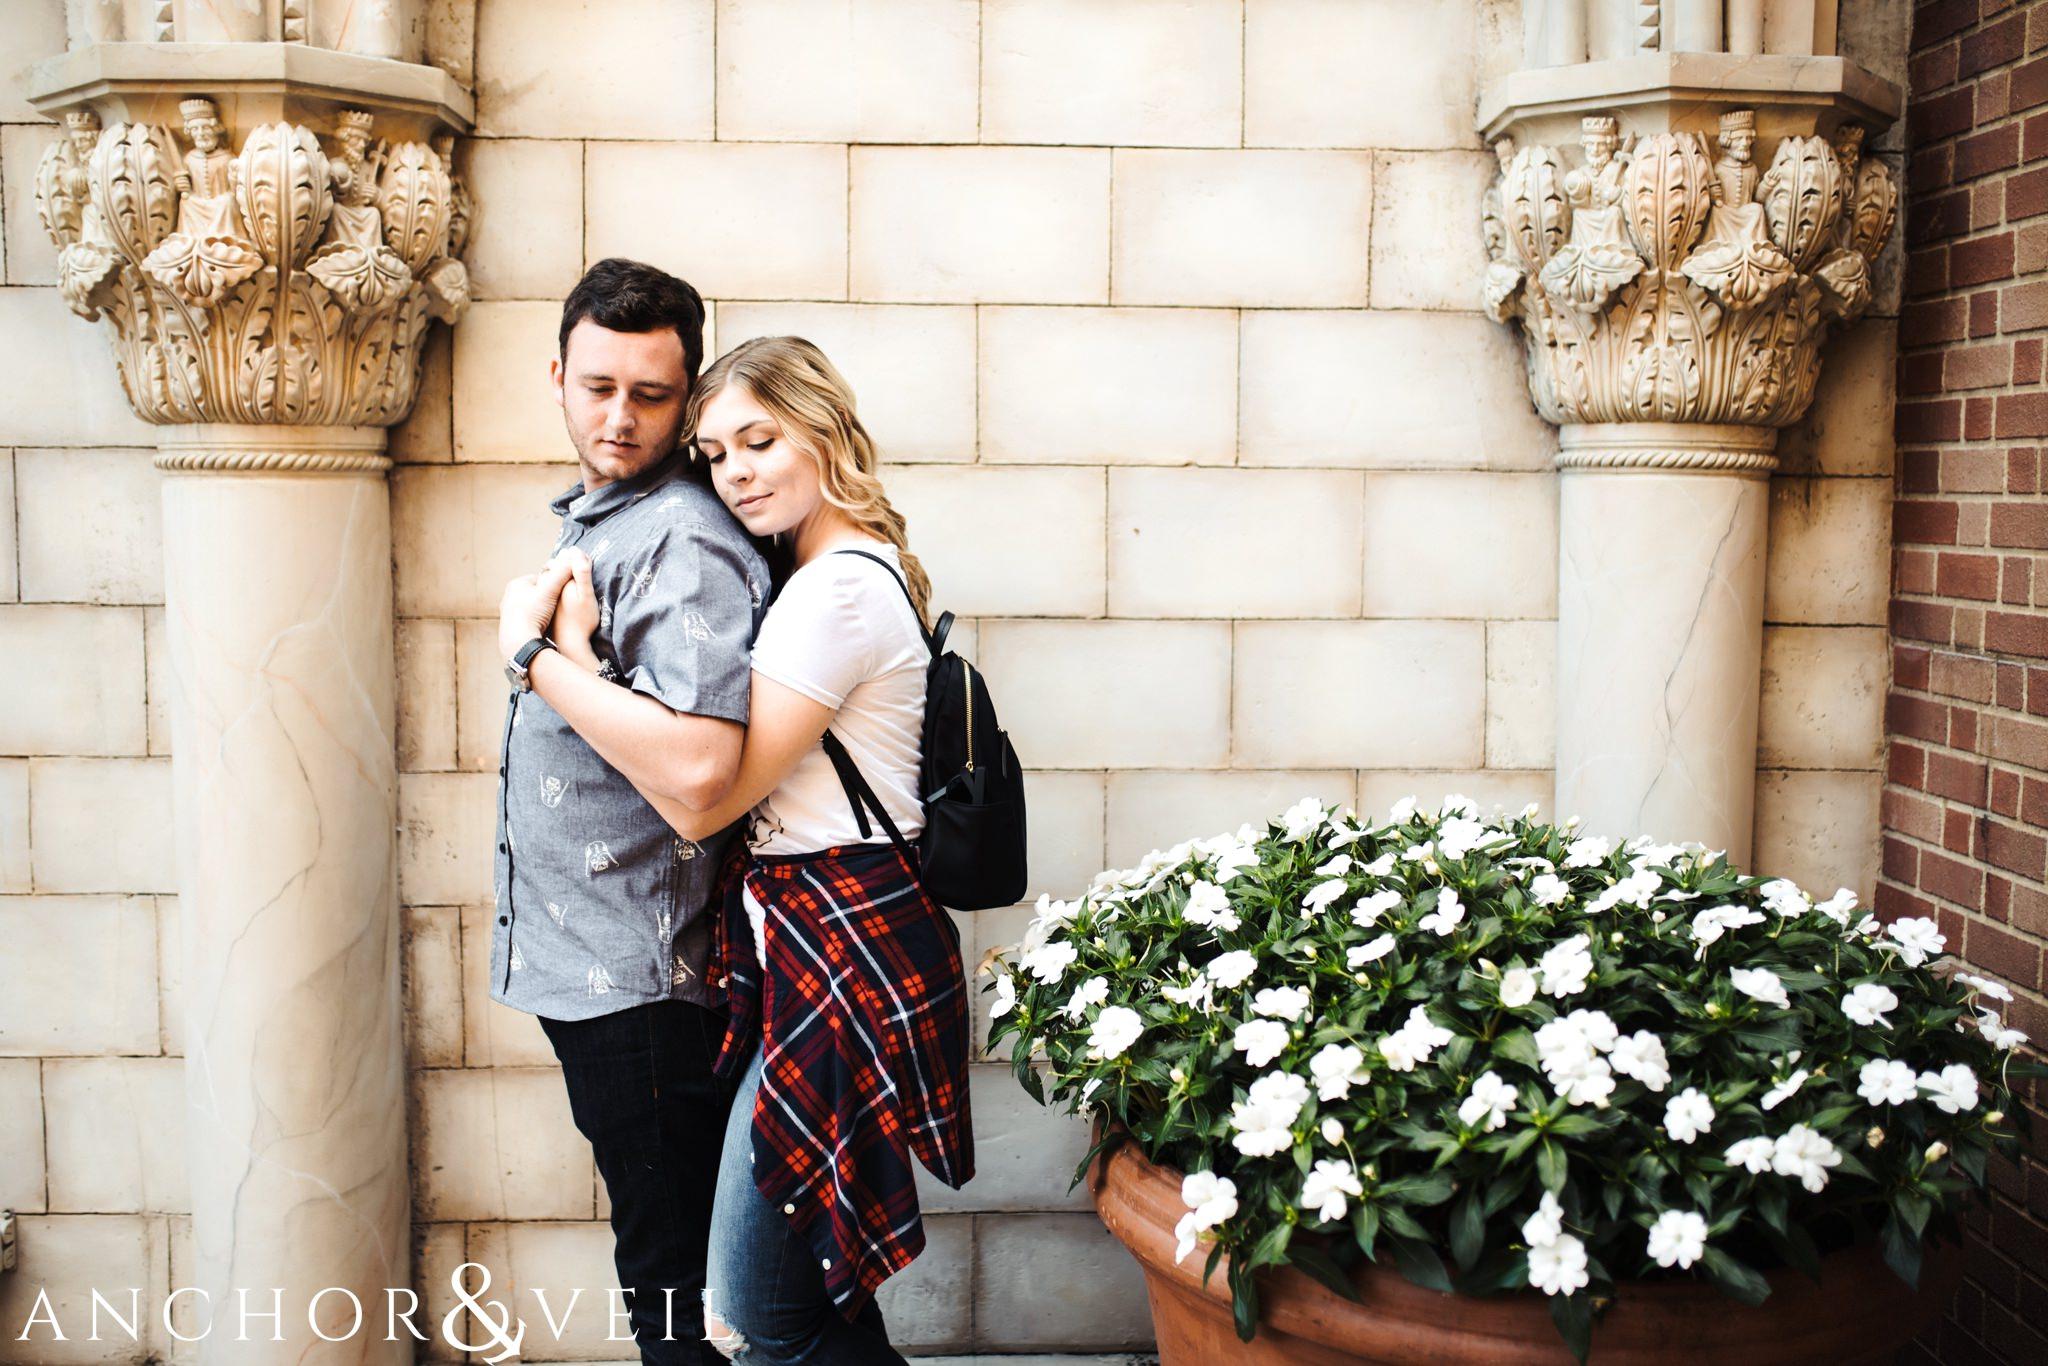 leaning on him in the stone arches in italy during their Disney world engagement session at Disney's Epcot